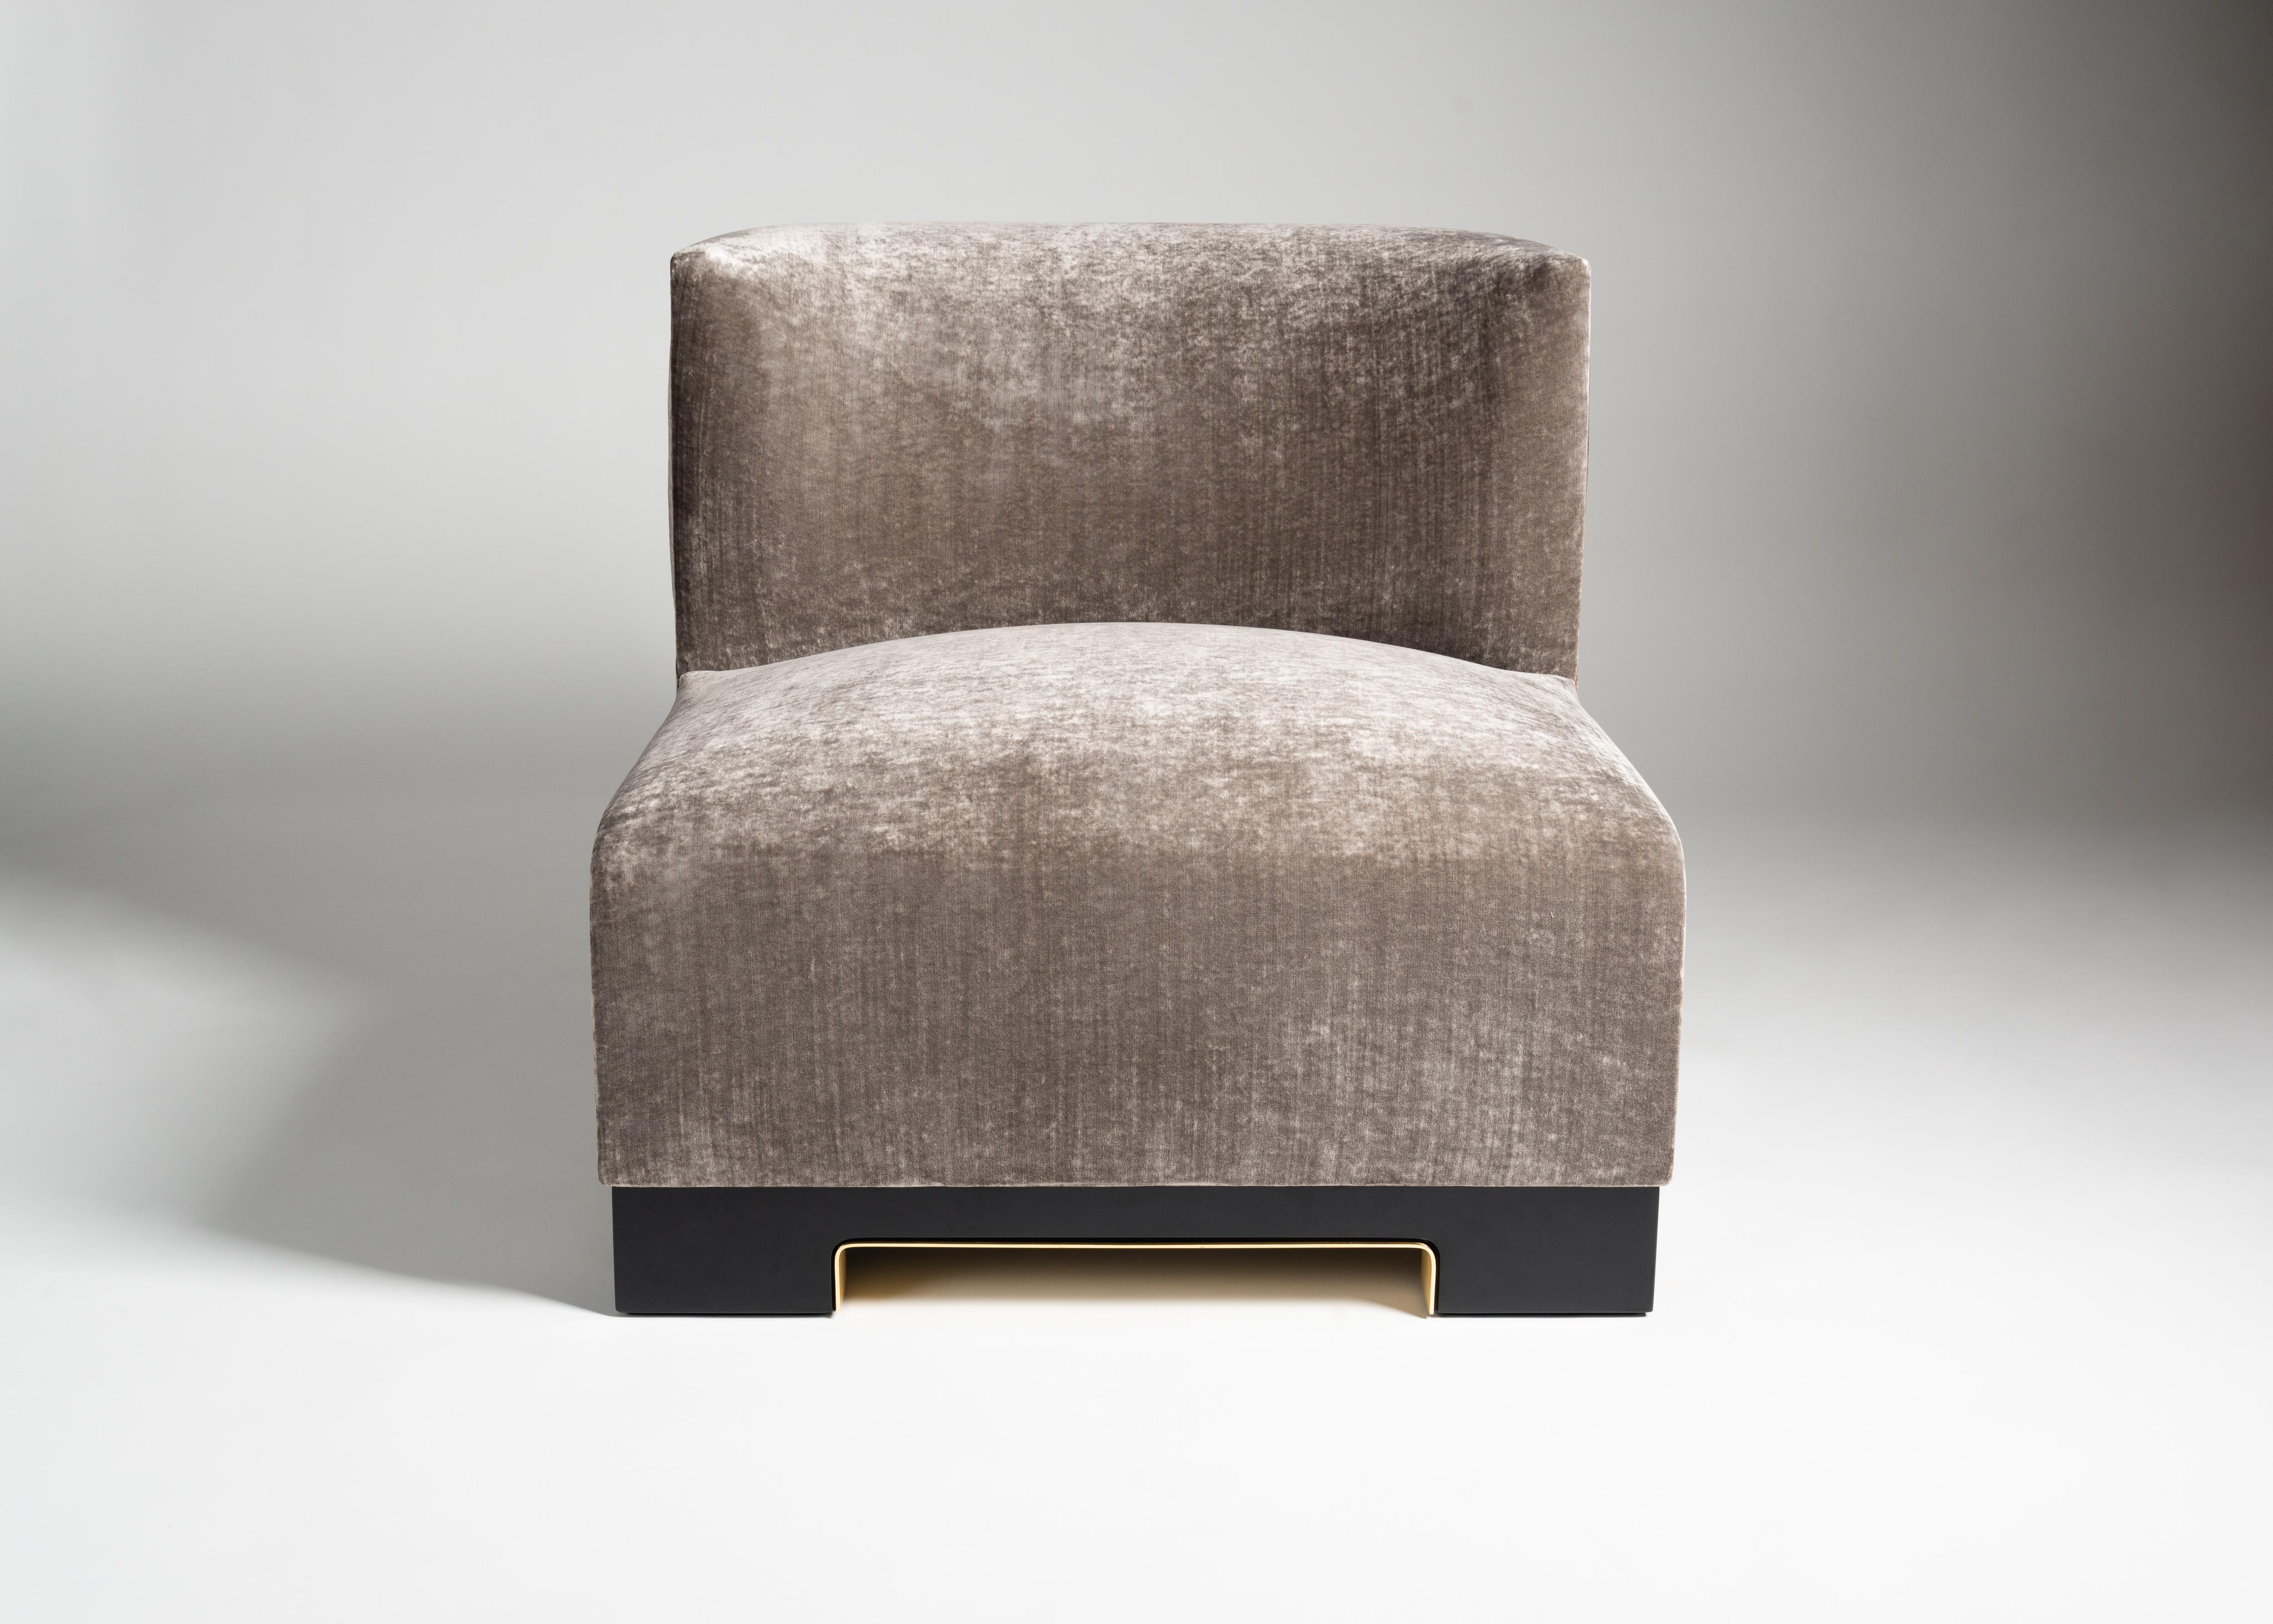 Vittoria is a plush, armless club chair by Italian designer Achille Salvagni. Its lacquer base is available in a variety of colors and accented with a rim of polished bronze. Upholstery is customizable.

Edition of 40.